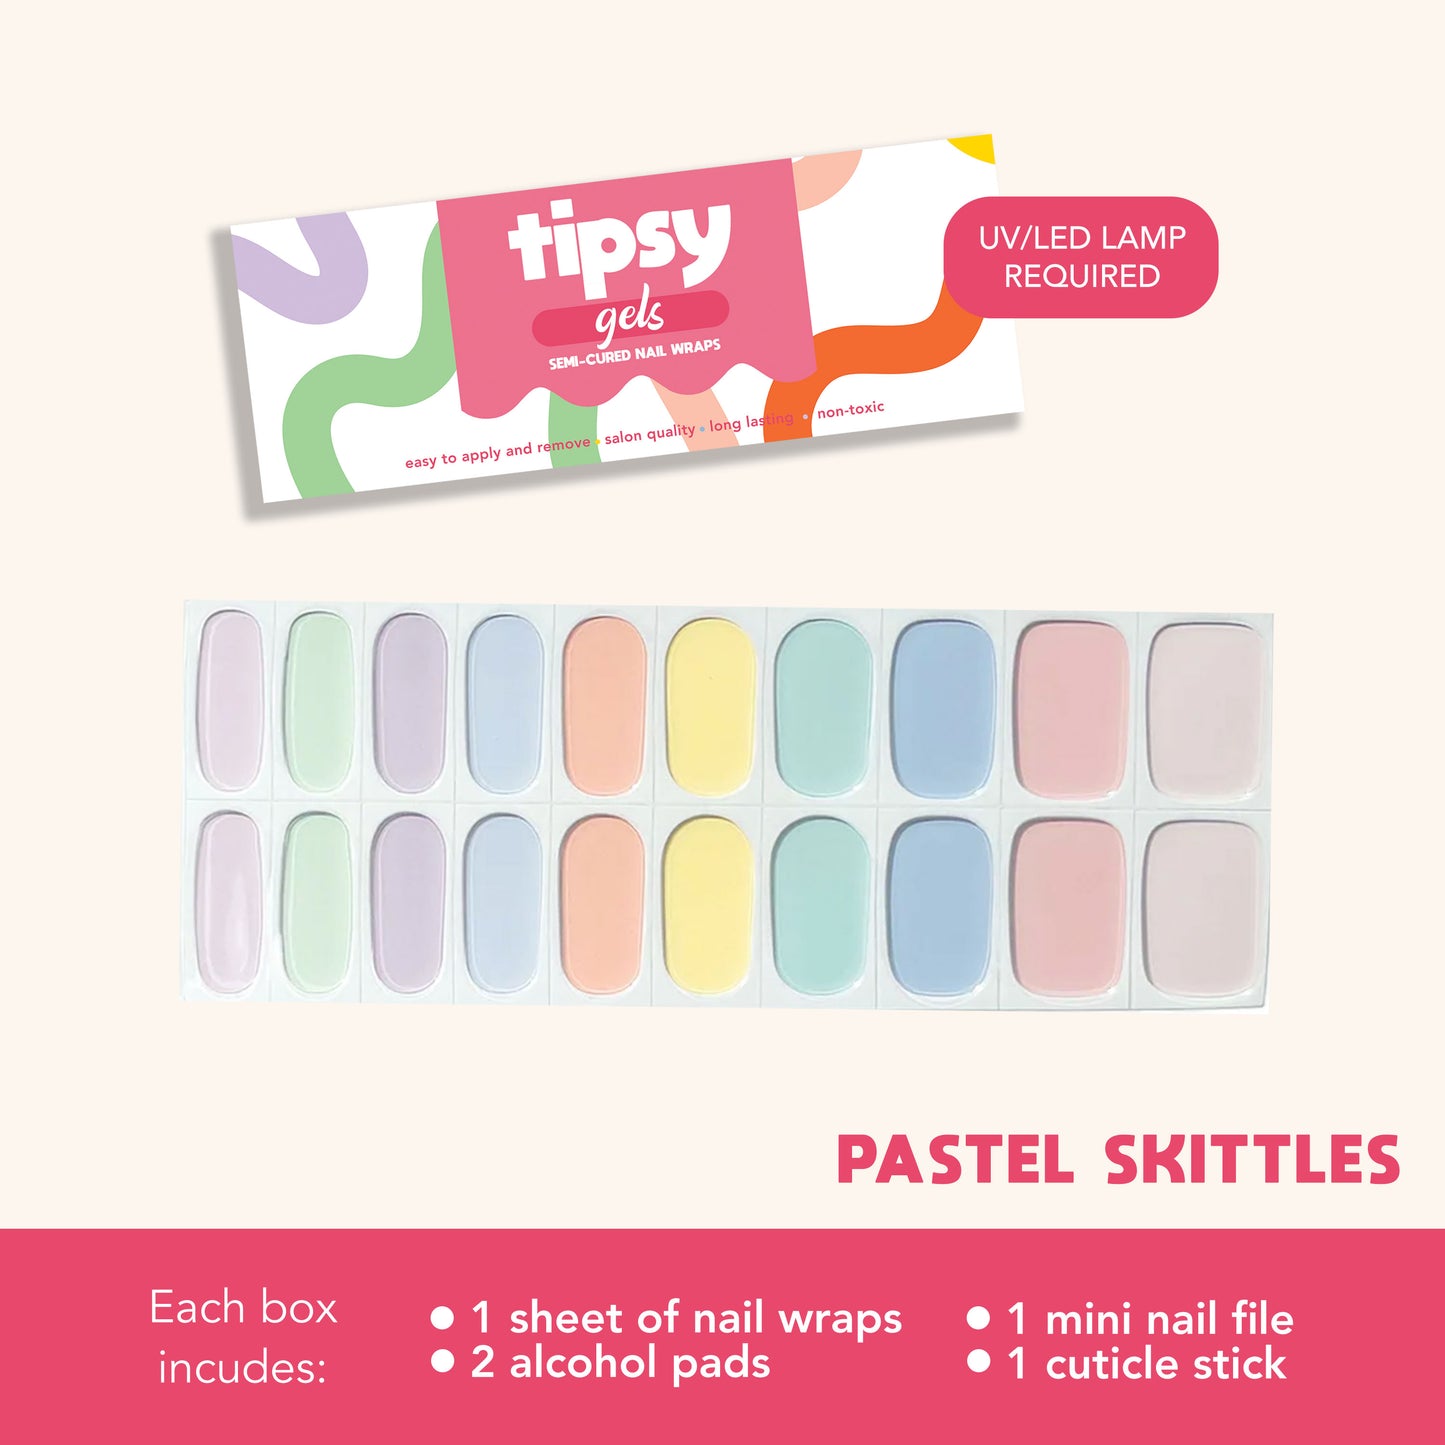 Pastel Skittles (Tipsy Gels Semi-Cured Nail Wraps)